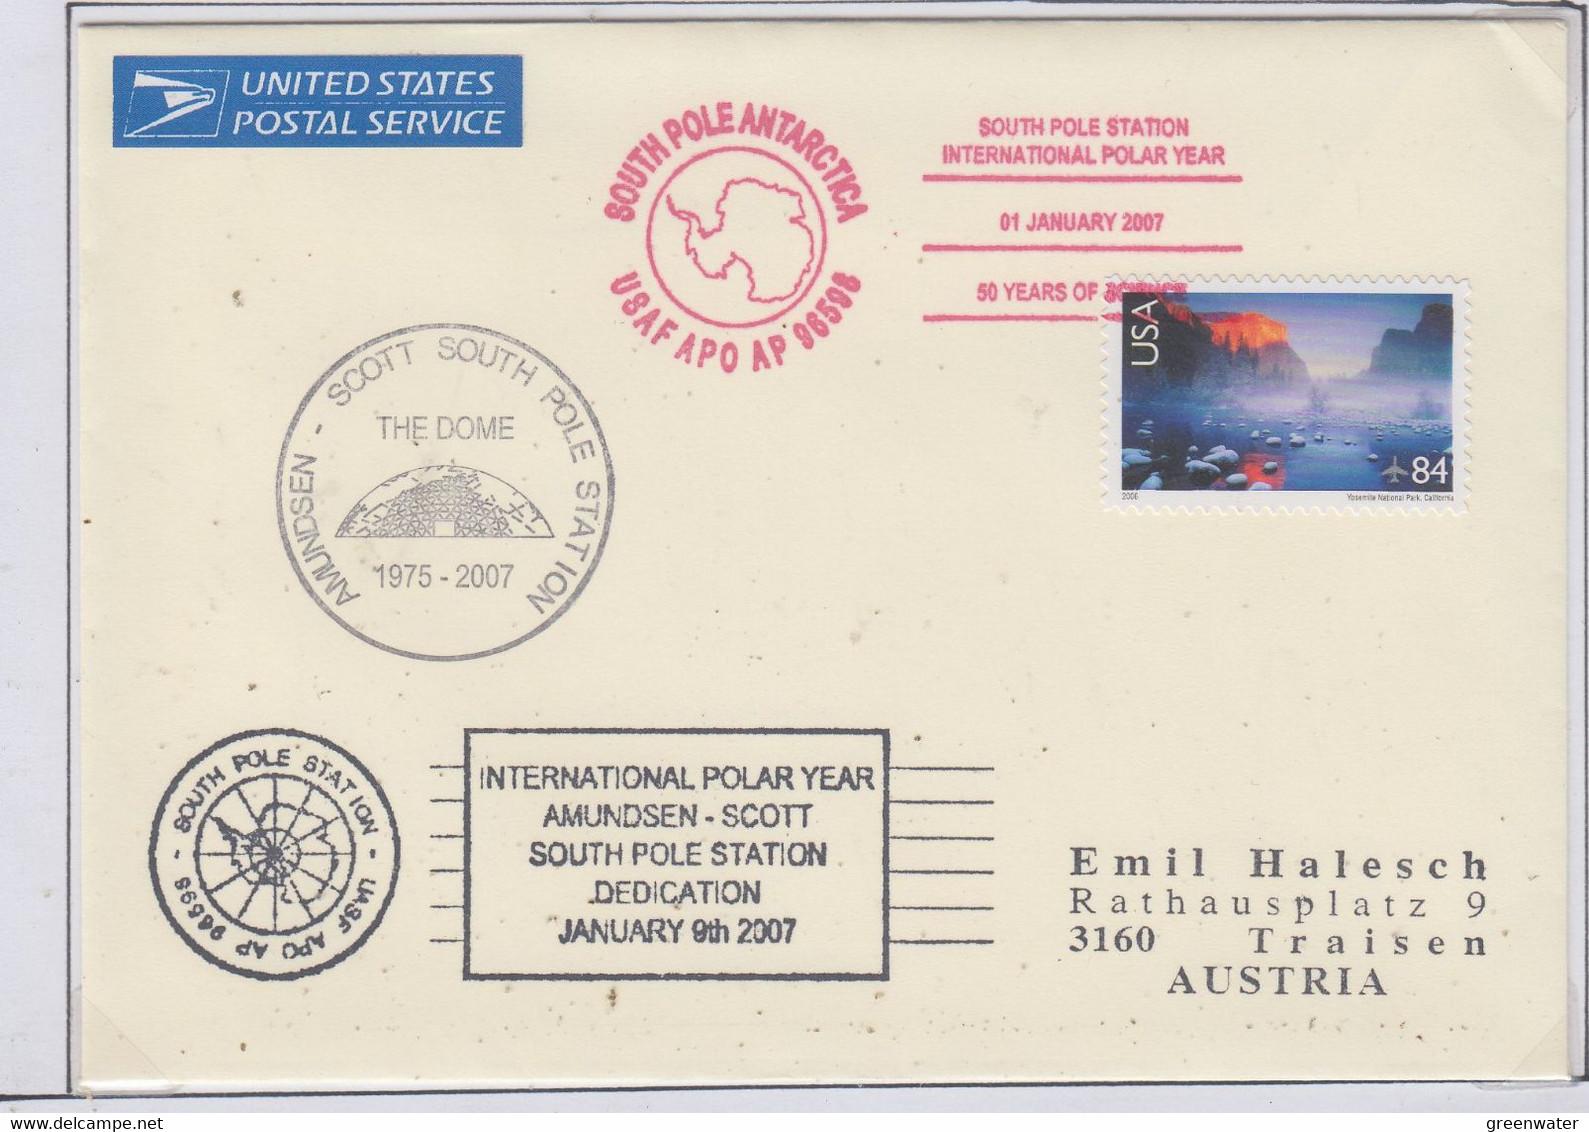 USA  South Pole Cover International Polar Year  Ca South Pole Station 01 JANUARY 2007 (PS191A) - Anno Polare Internazionale